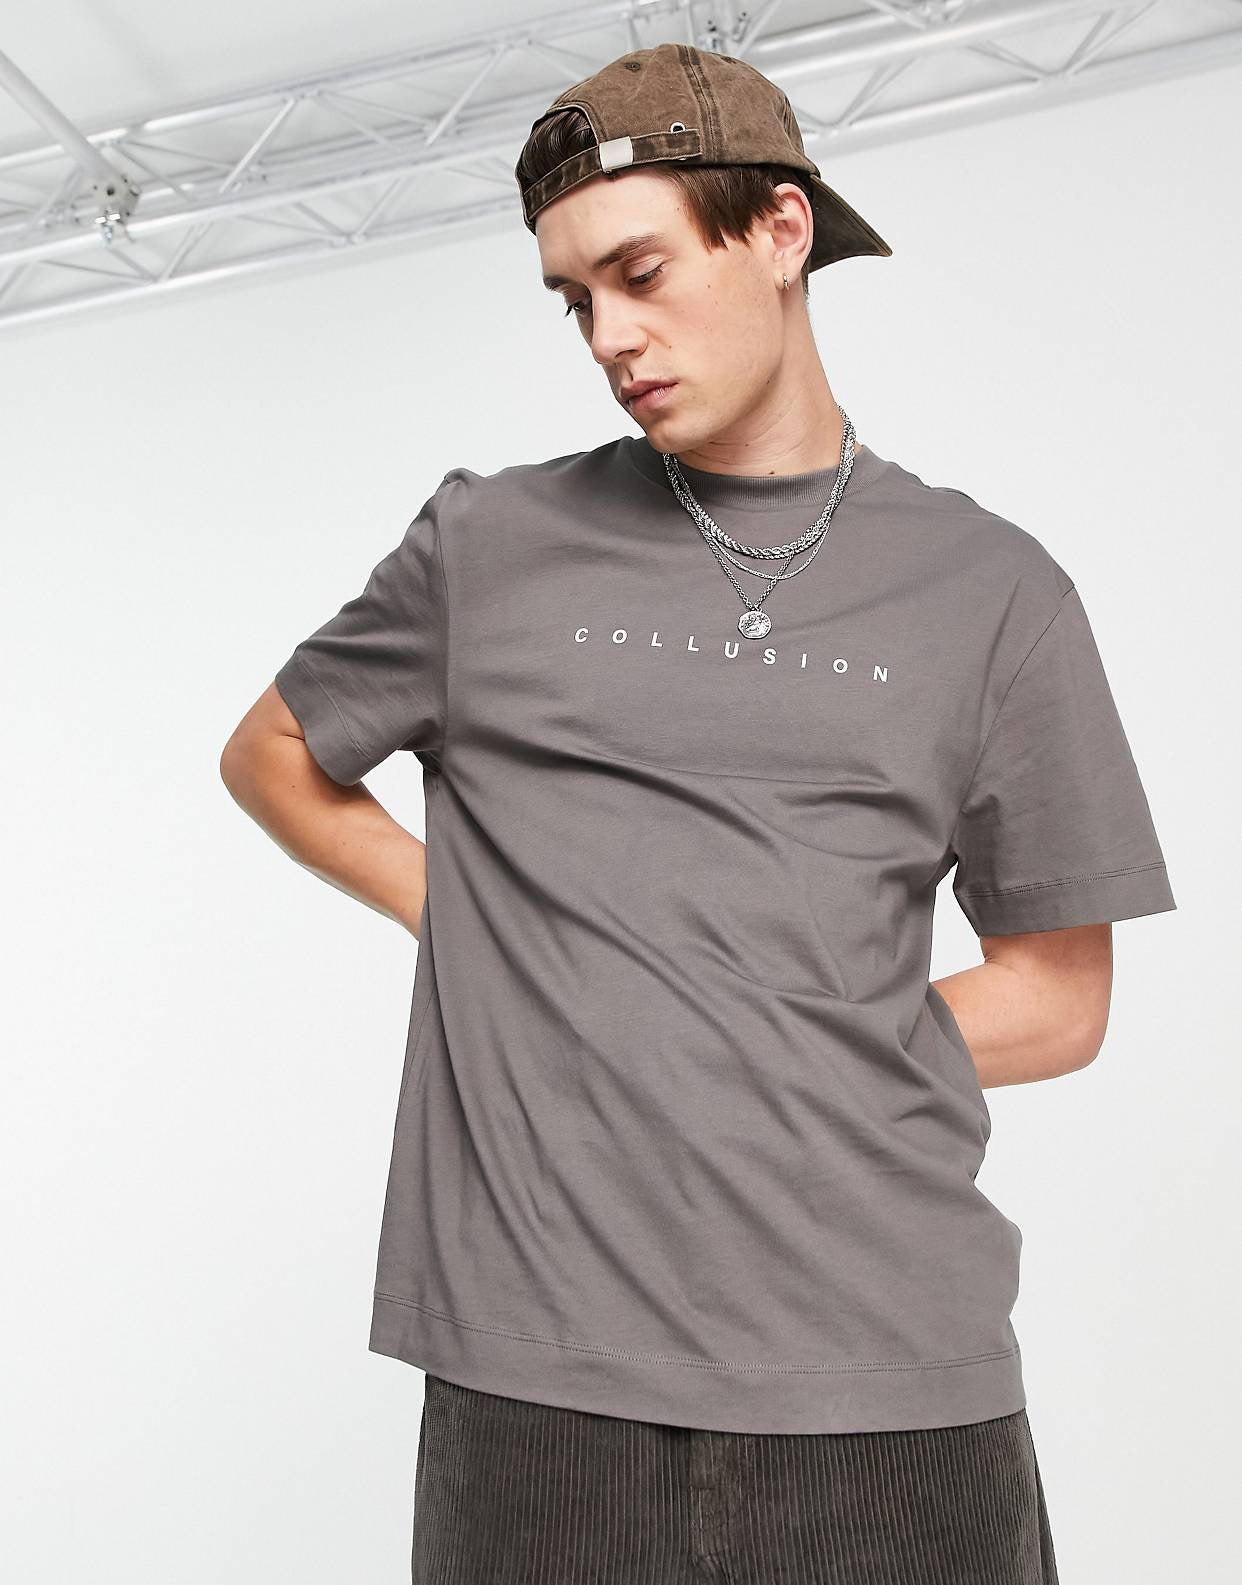 COLLUSION logo t-shirt in charcoal